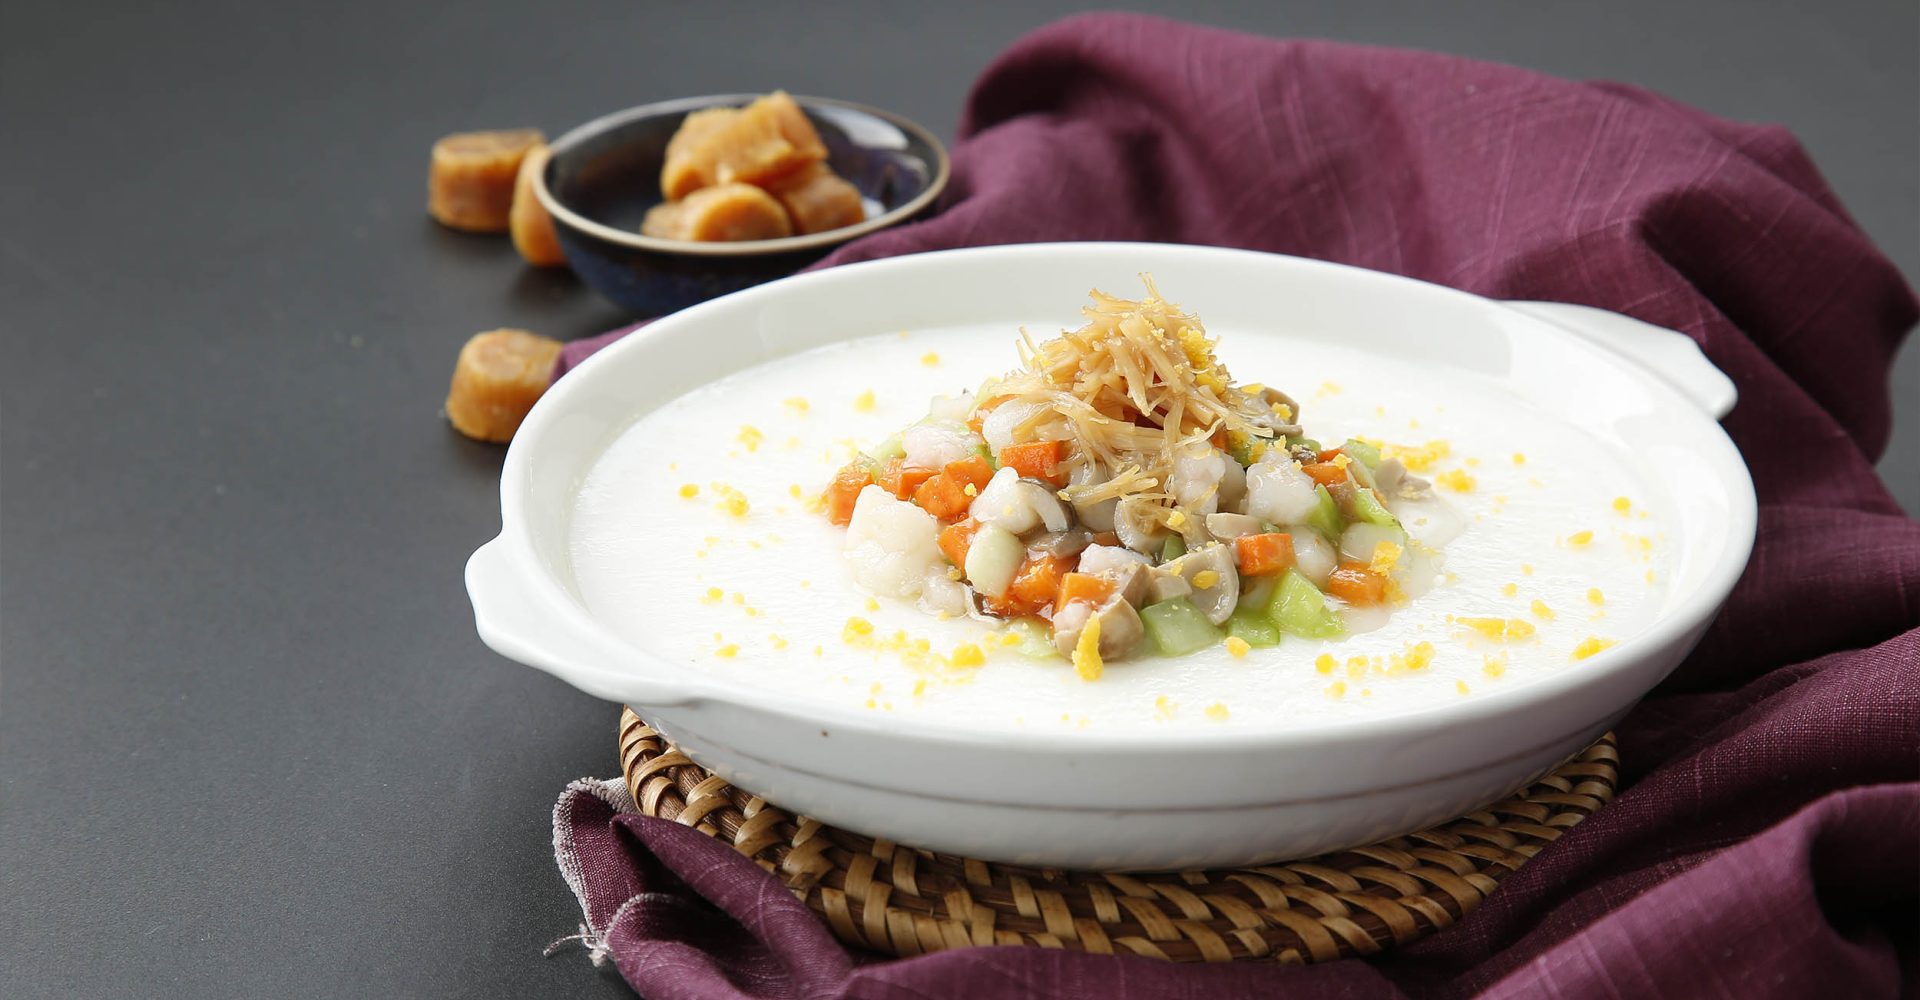 Xiu Healthy dishes - Steamed egg white with seafood and dried scallops